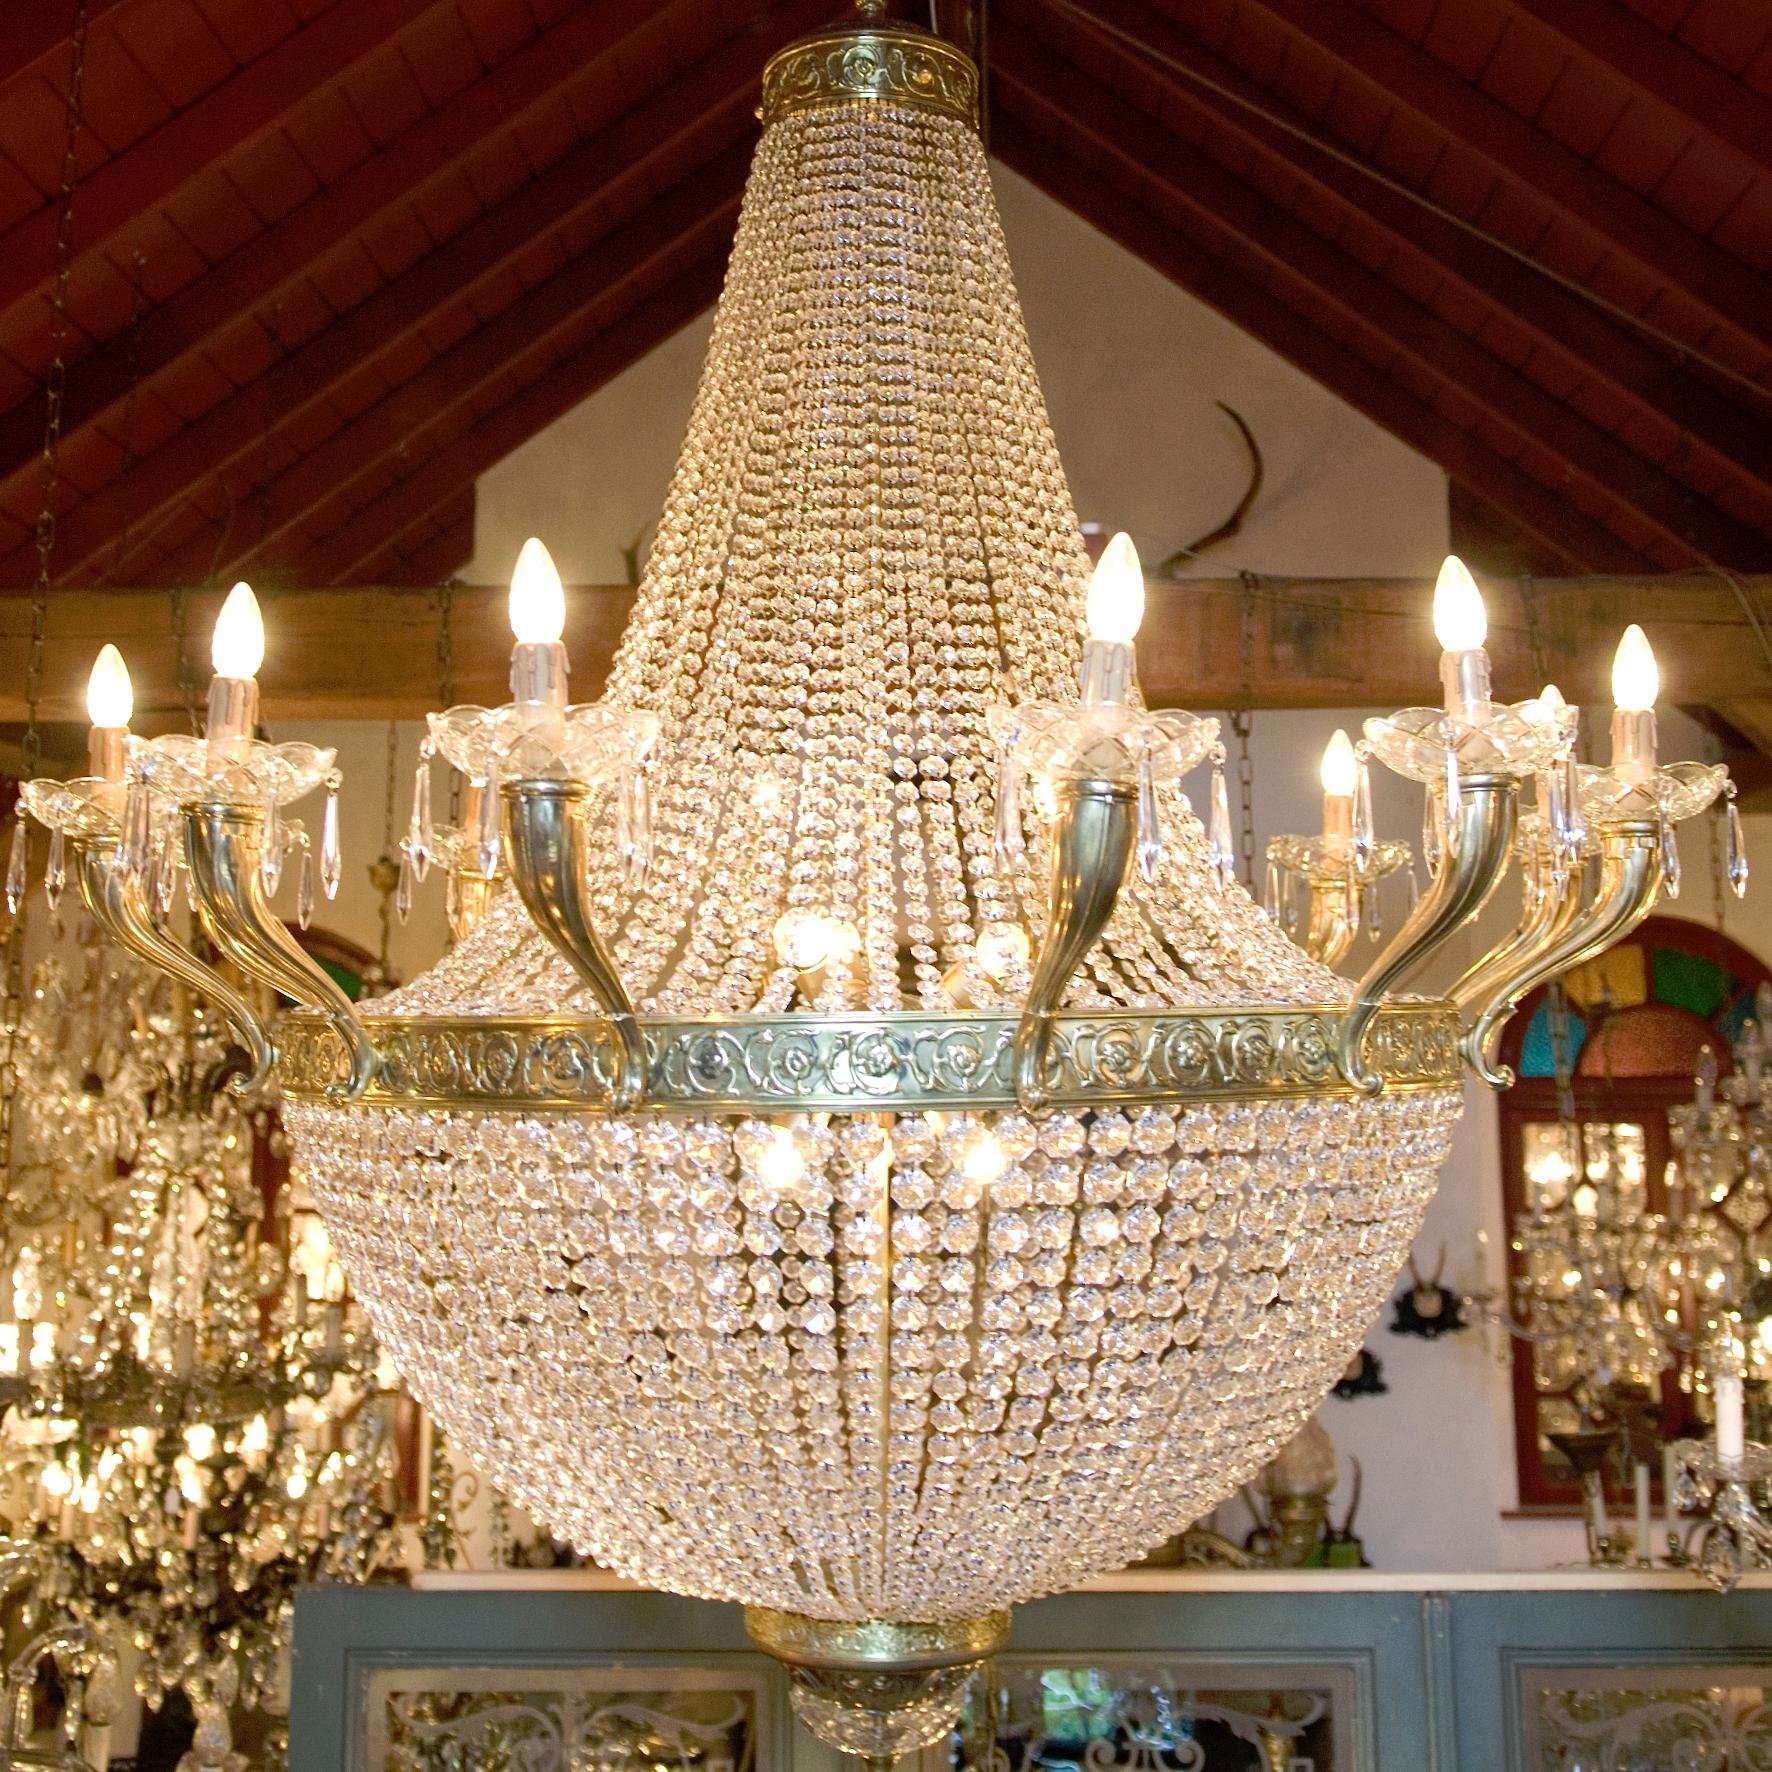 Greatest Collection of Chandeliers in Europe. Interior Design. Antique. Crystal Chandeliers, French Chandeliers, Castle Chandliers, Maria Theresa Chandeliers.